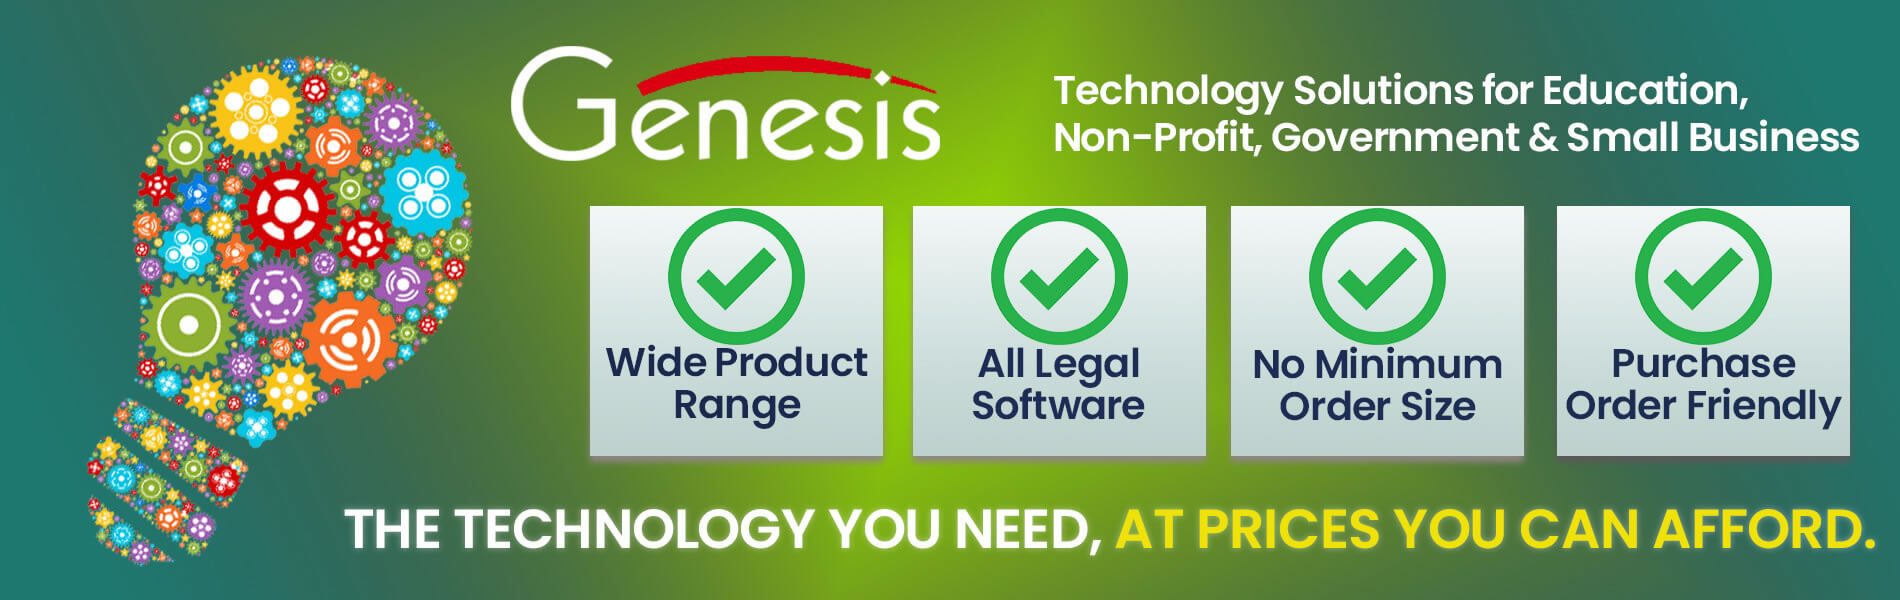 Genesis Technologies - Technology Solutions for Education, Non-Profit, Small Business and Government